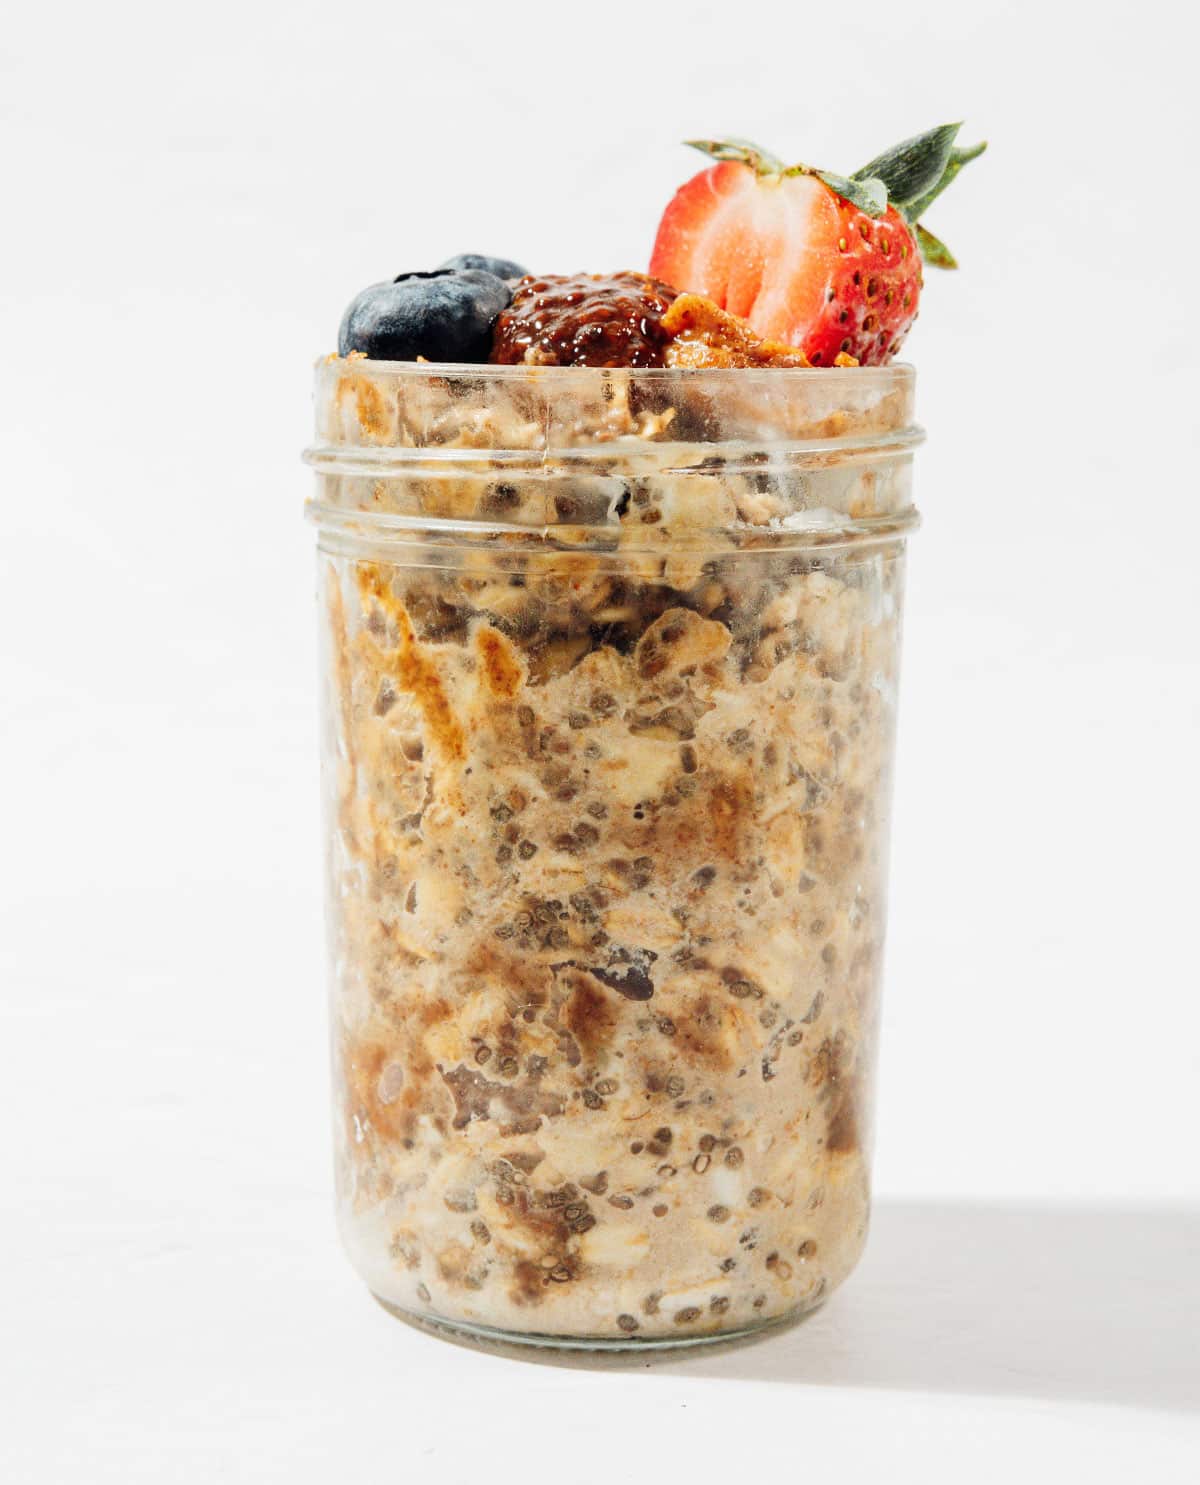 Ingredients for PB & J overnight oats in a jar.